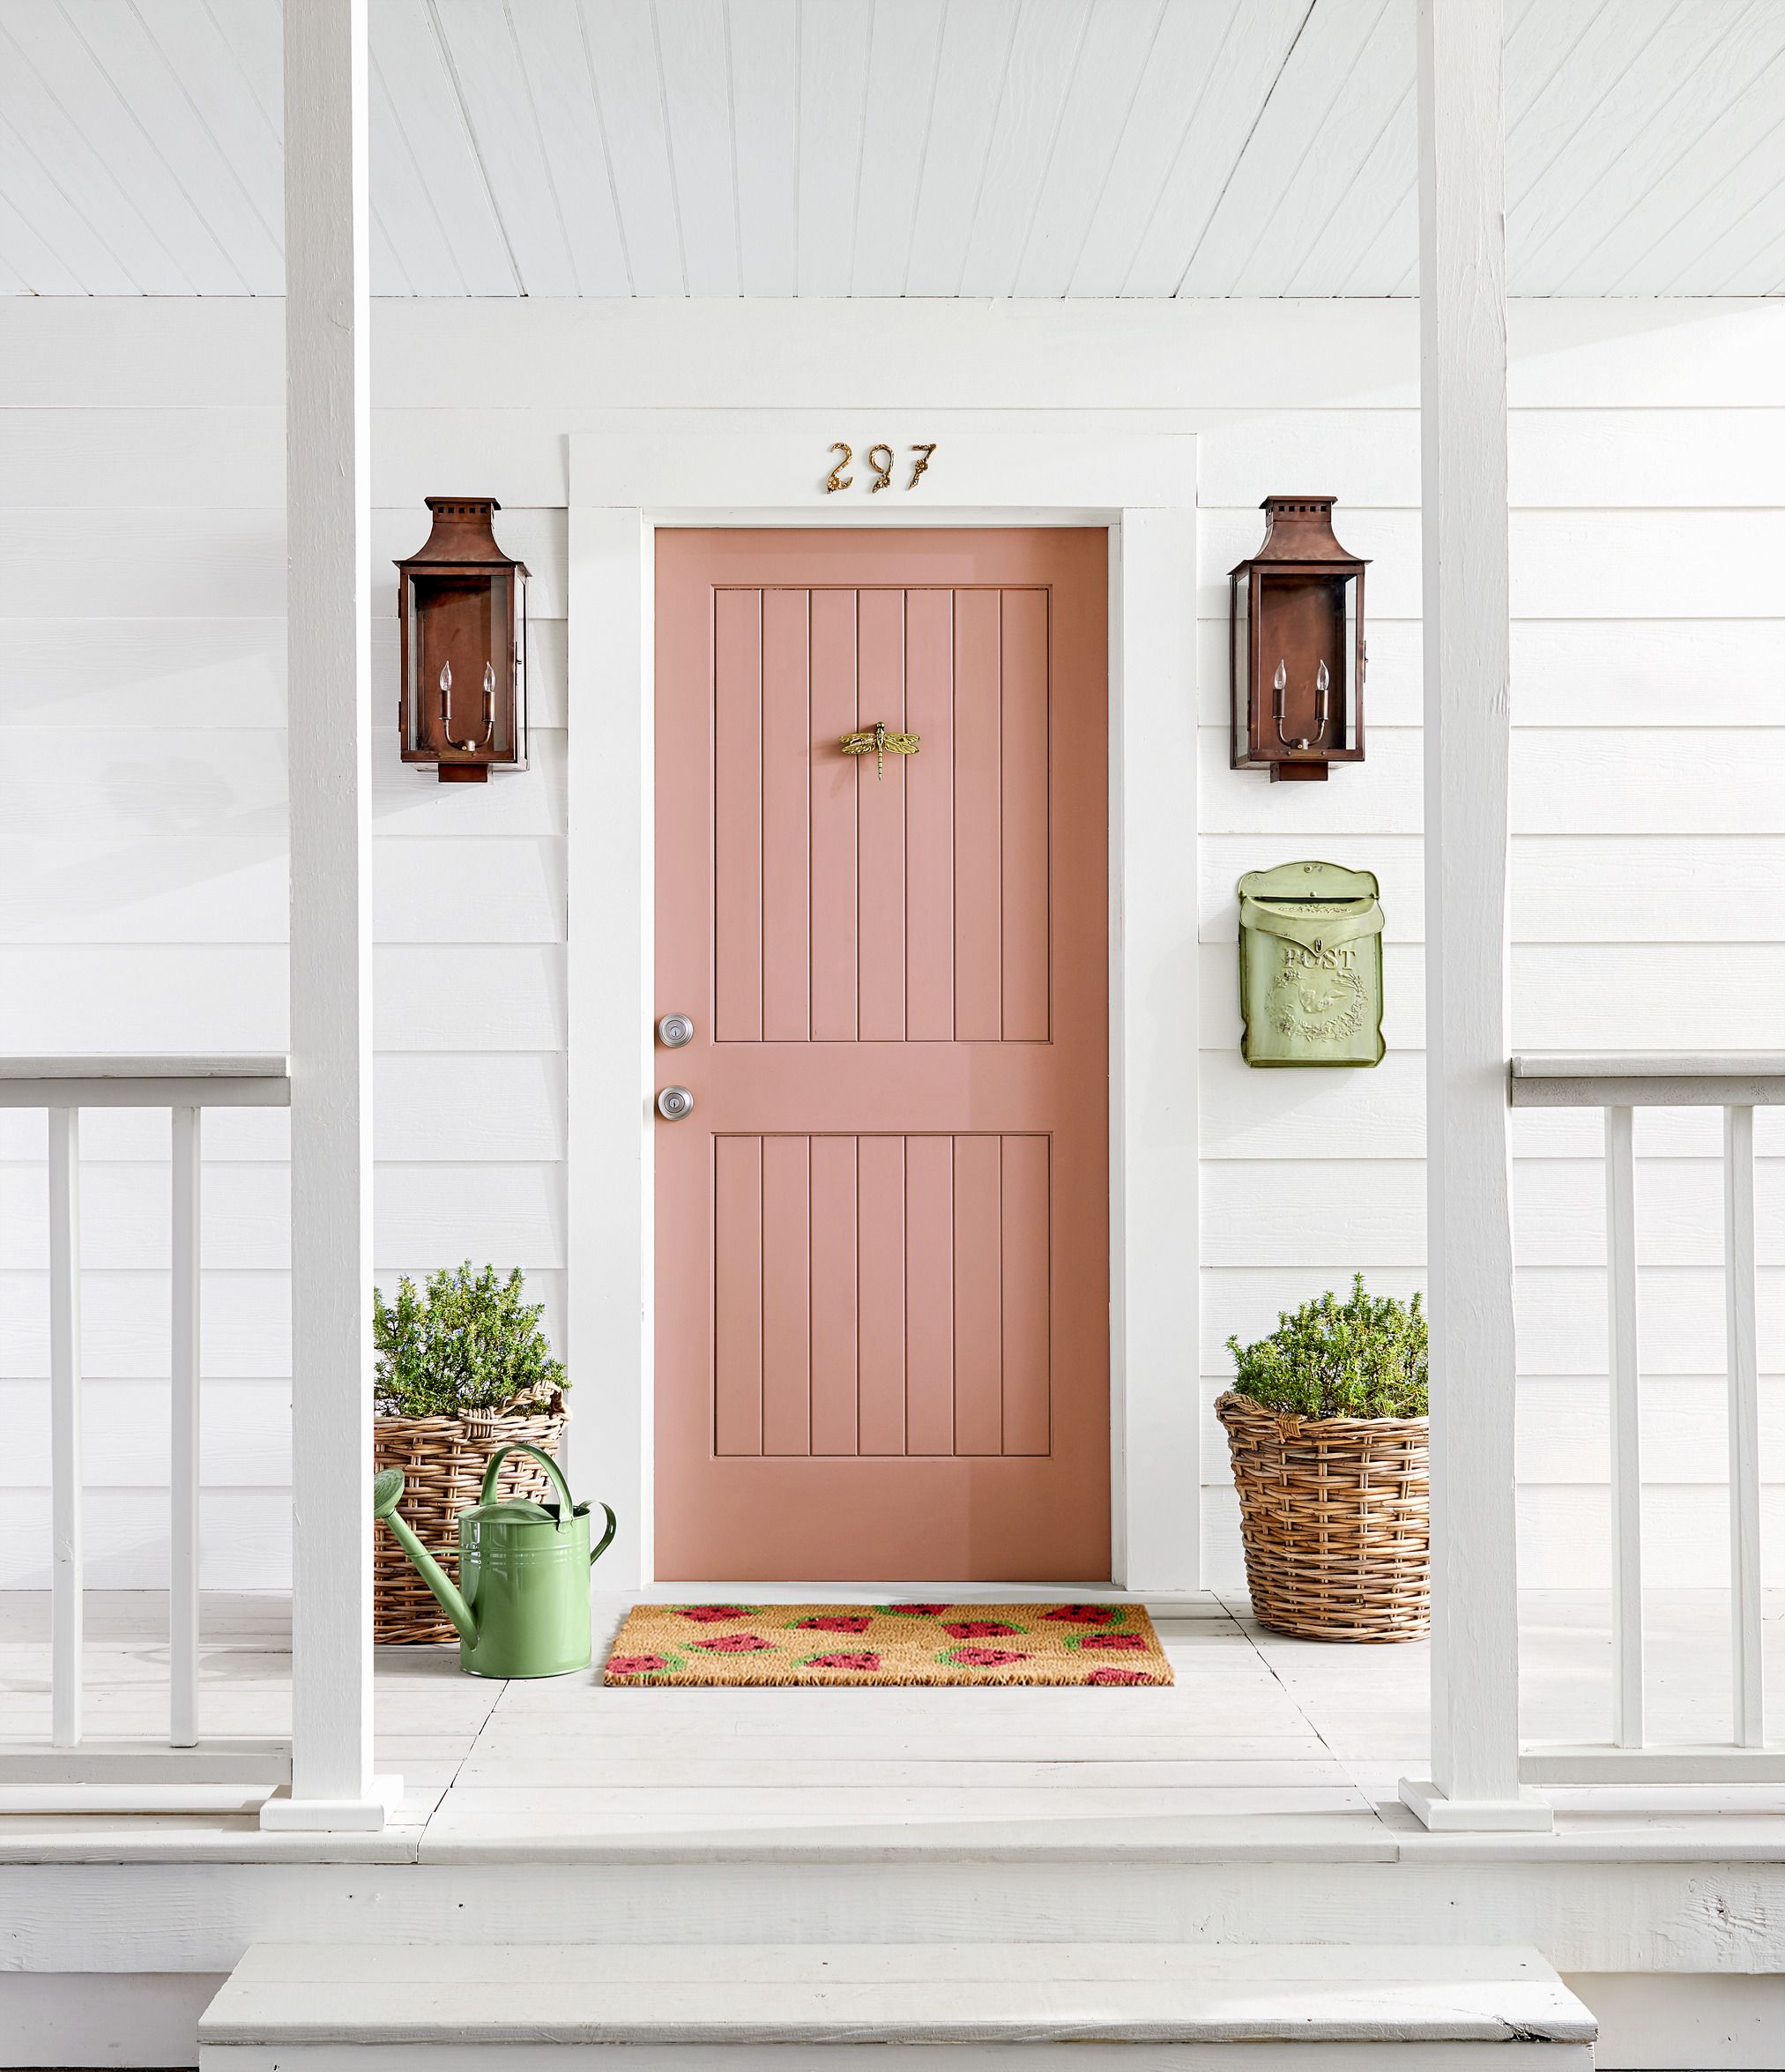 Most Popular Front Door Colors of the Year